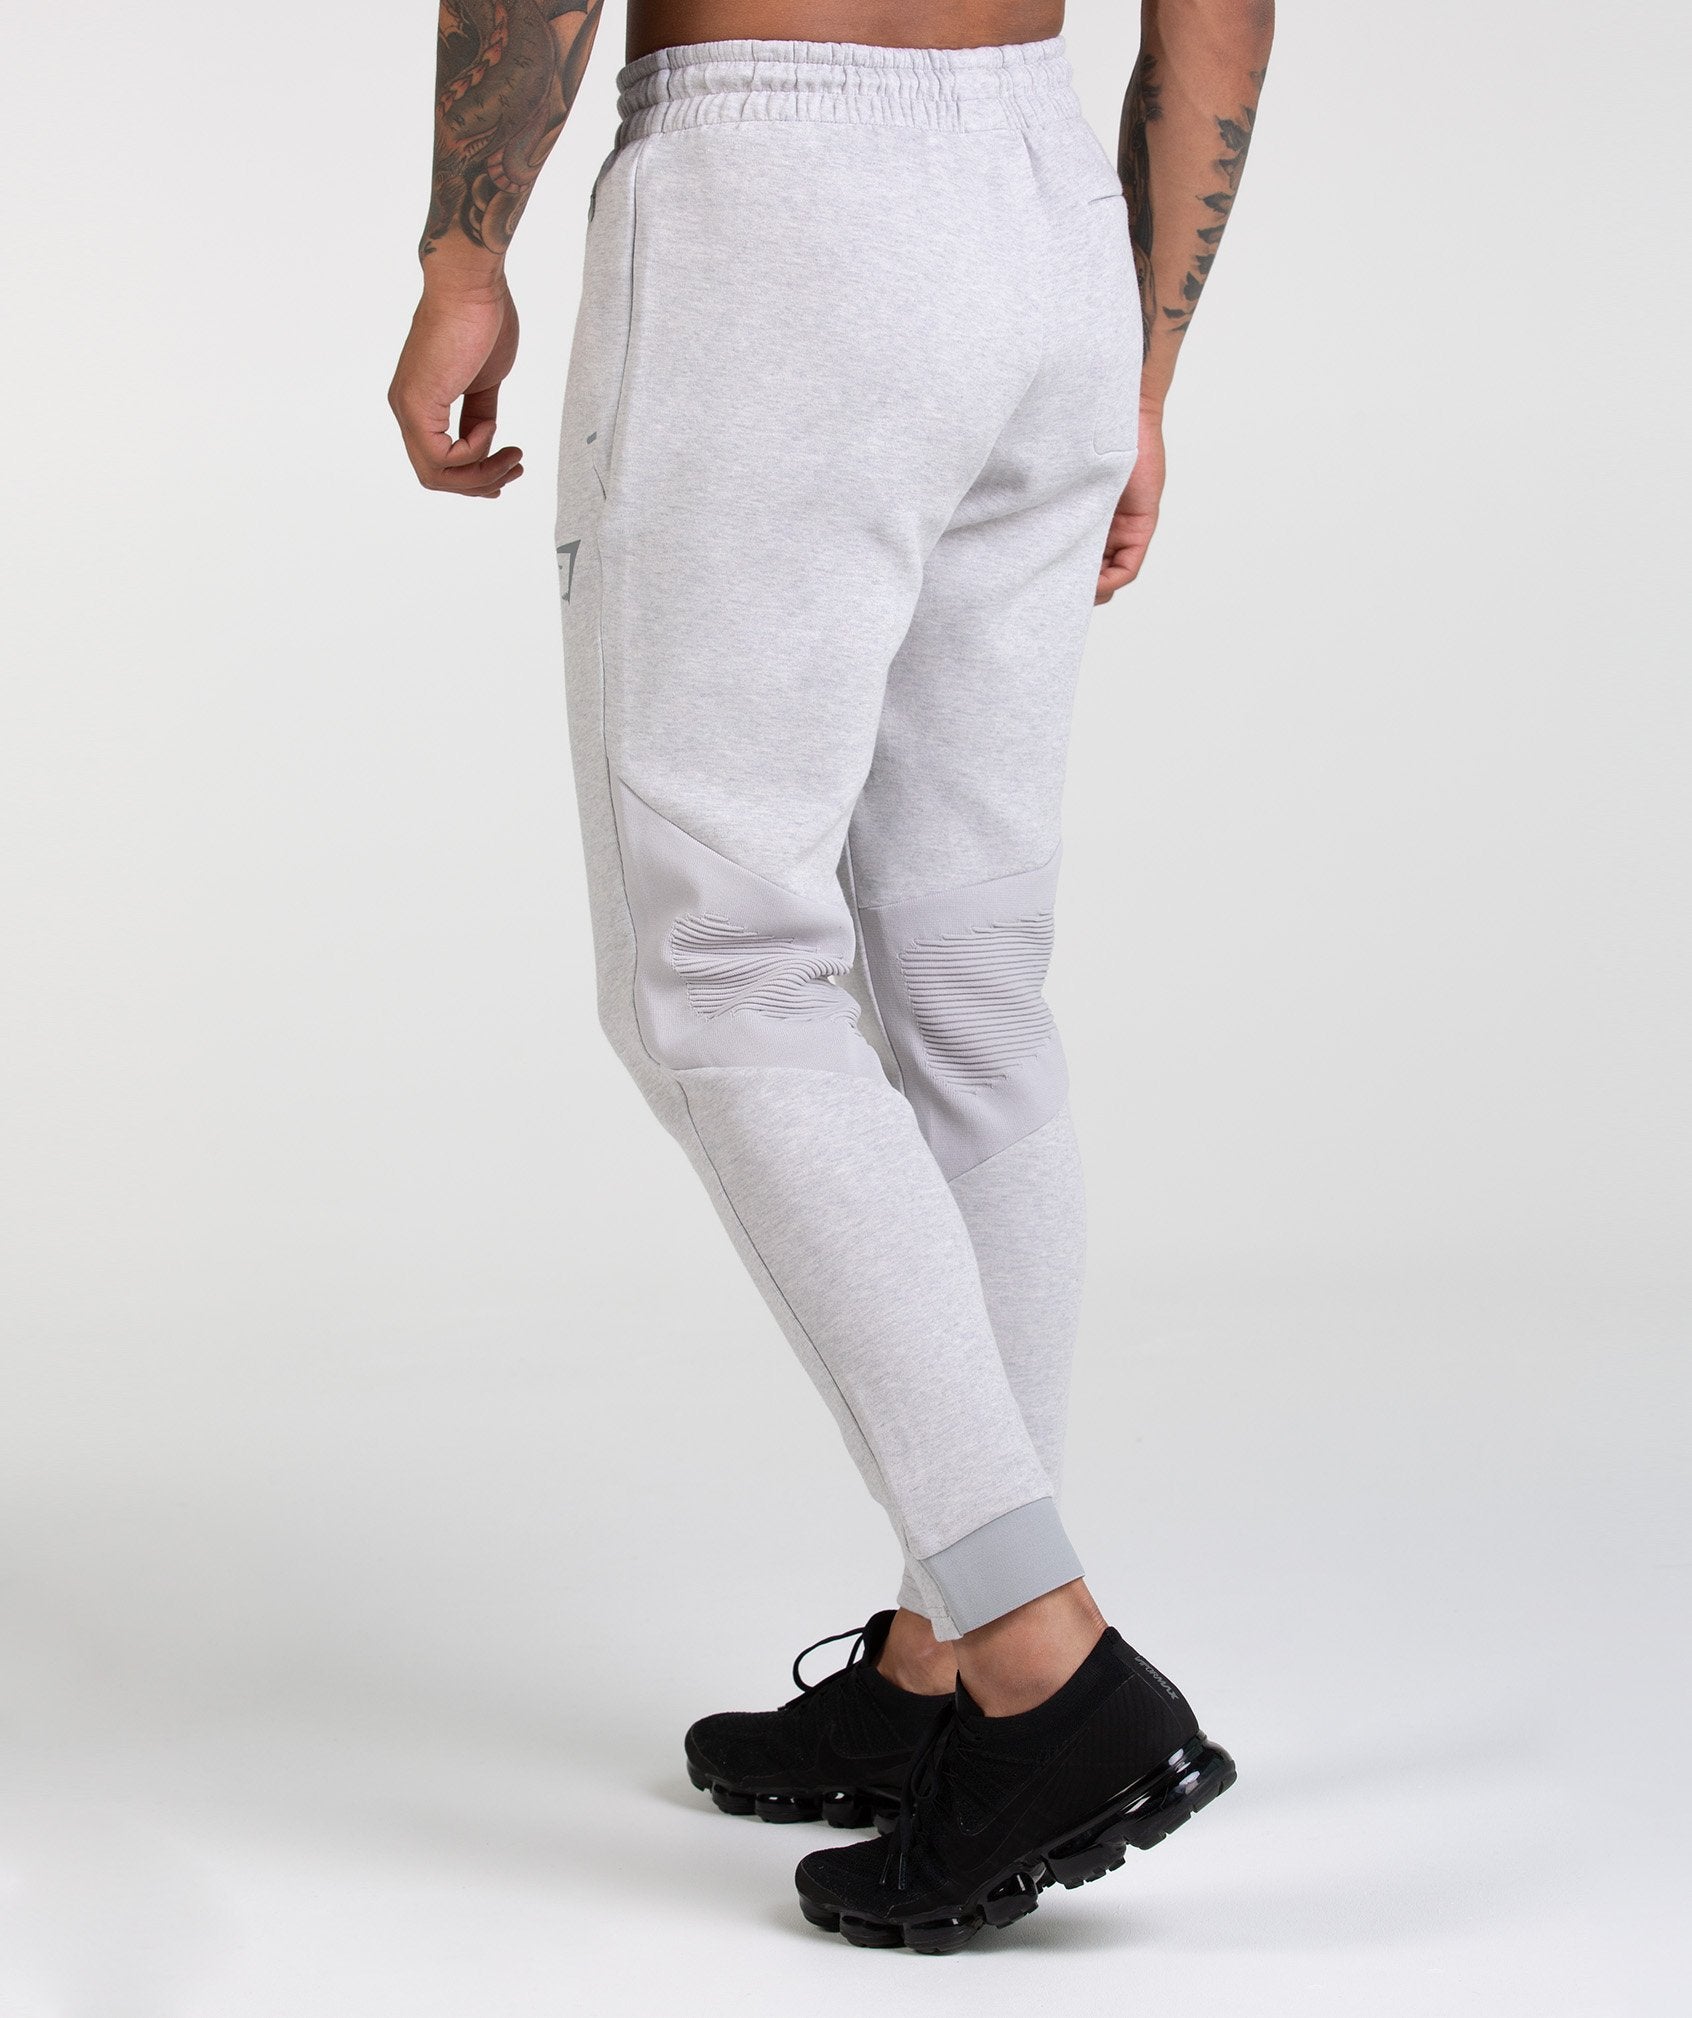 Ozone Bottoms in Light Grey Marl - view 2